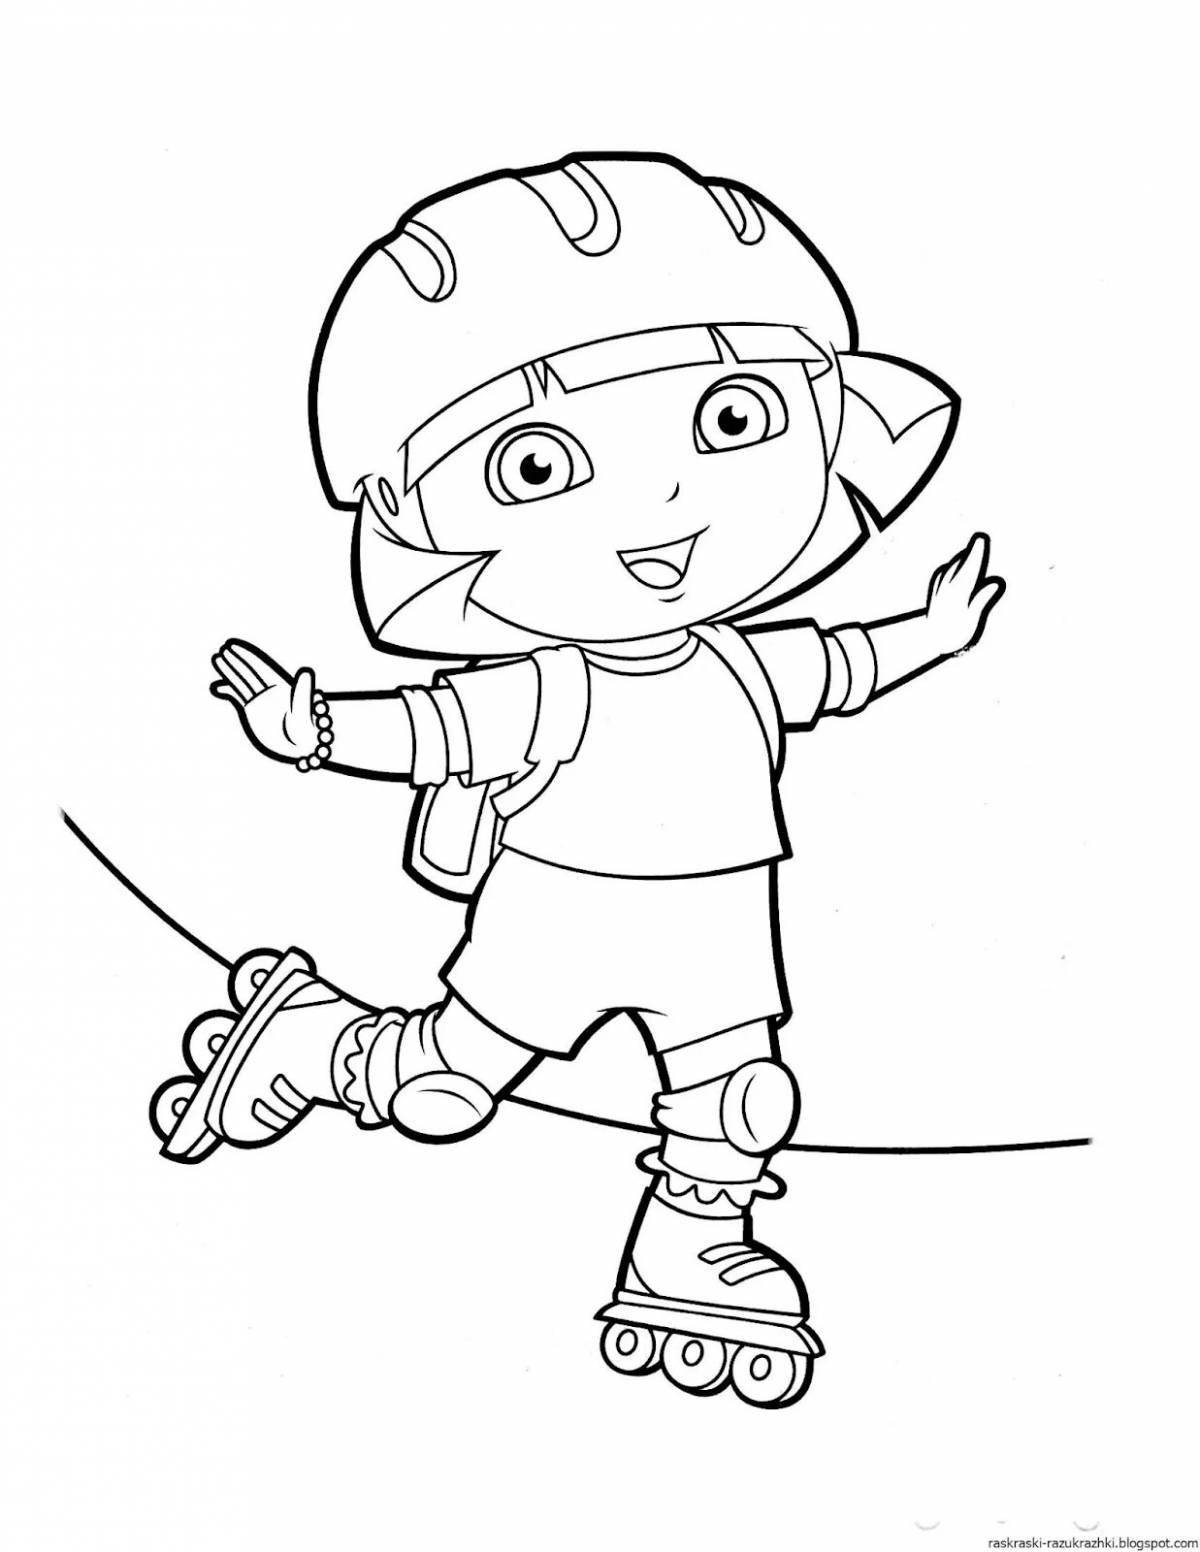 Live summer sports coloring page